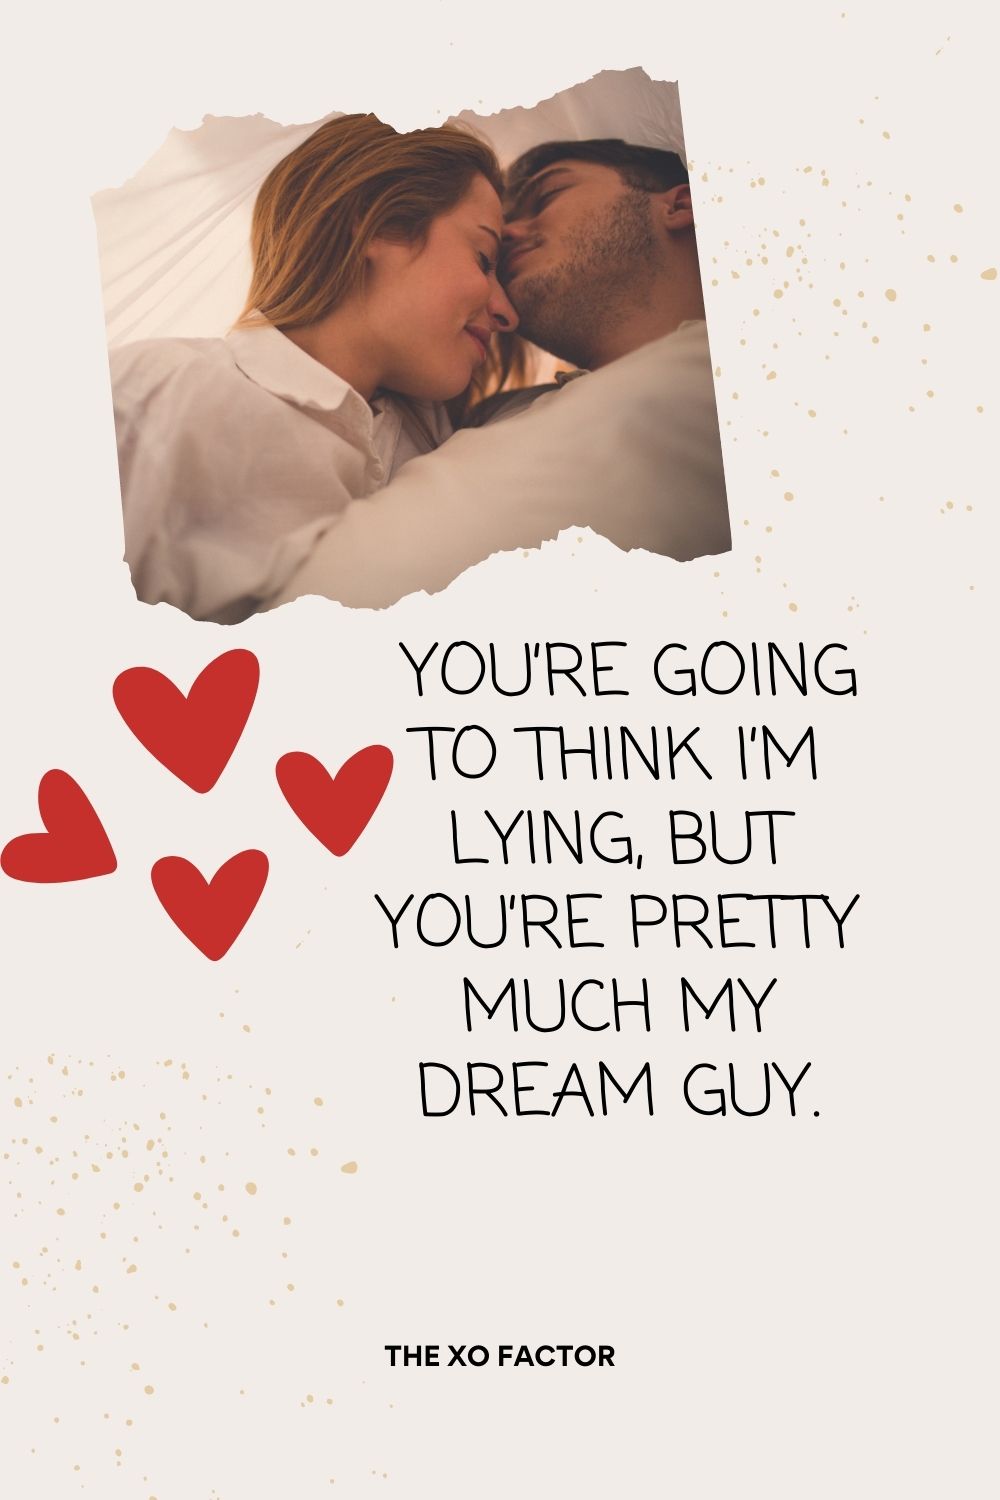 You’re going to think I’m lying, but you’re pretty much my dream guy.